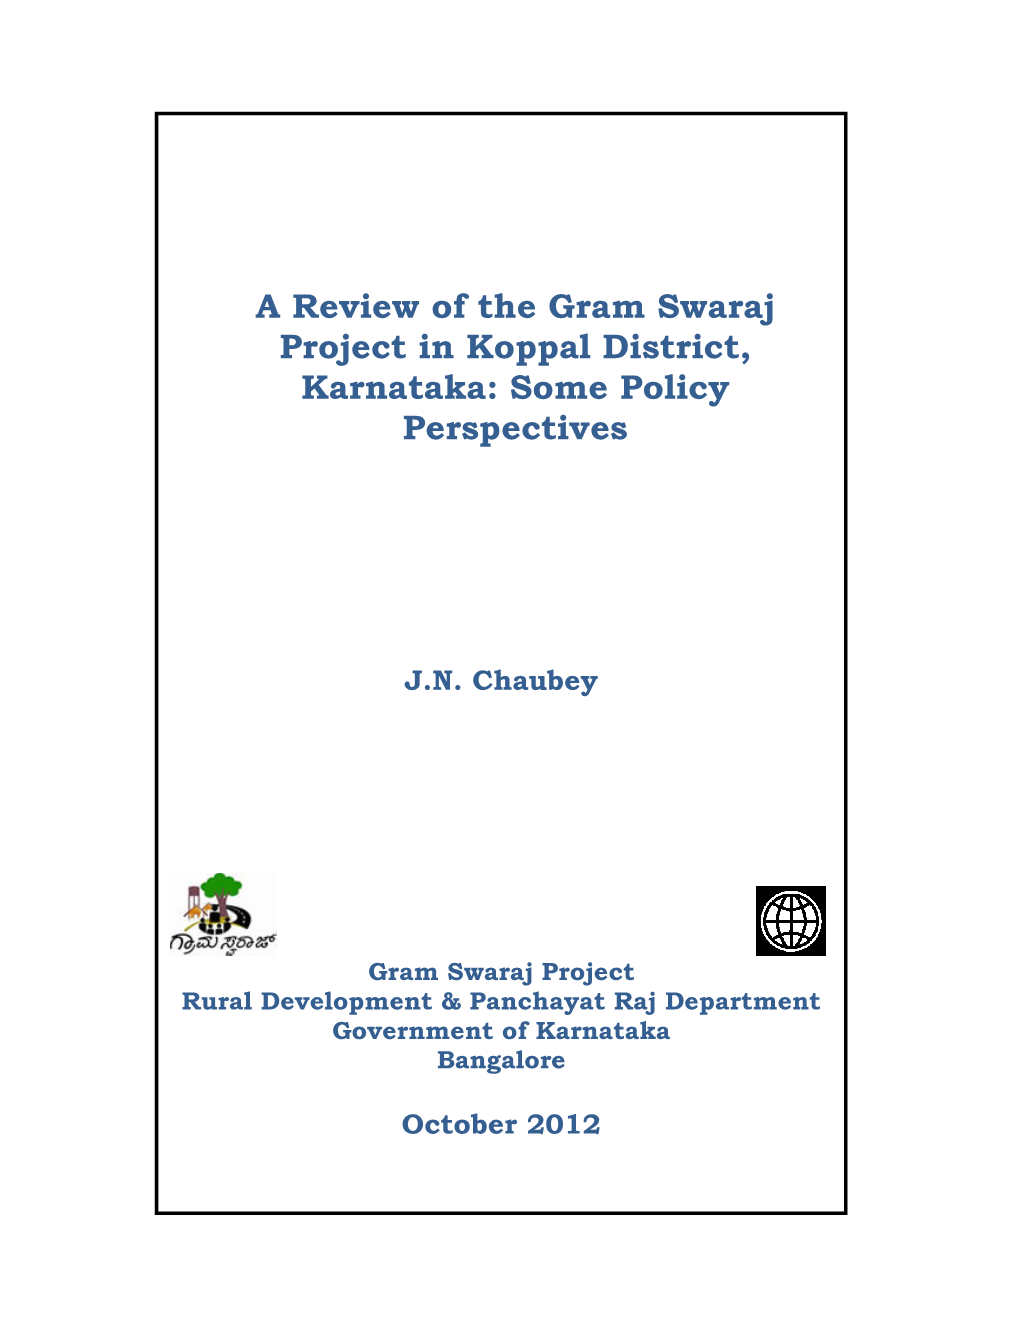 A Review of the Gram Swaraj Project in Koppal District, Karnataka: Some Policy Perspectives